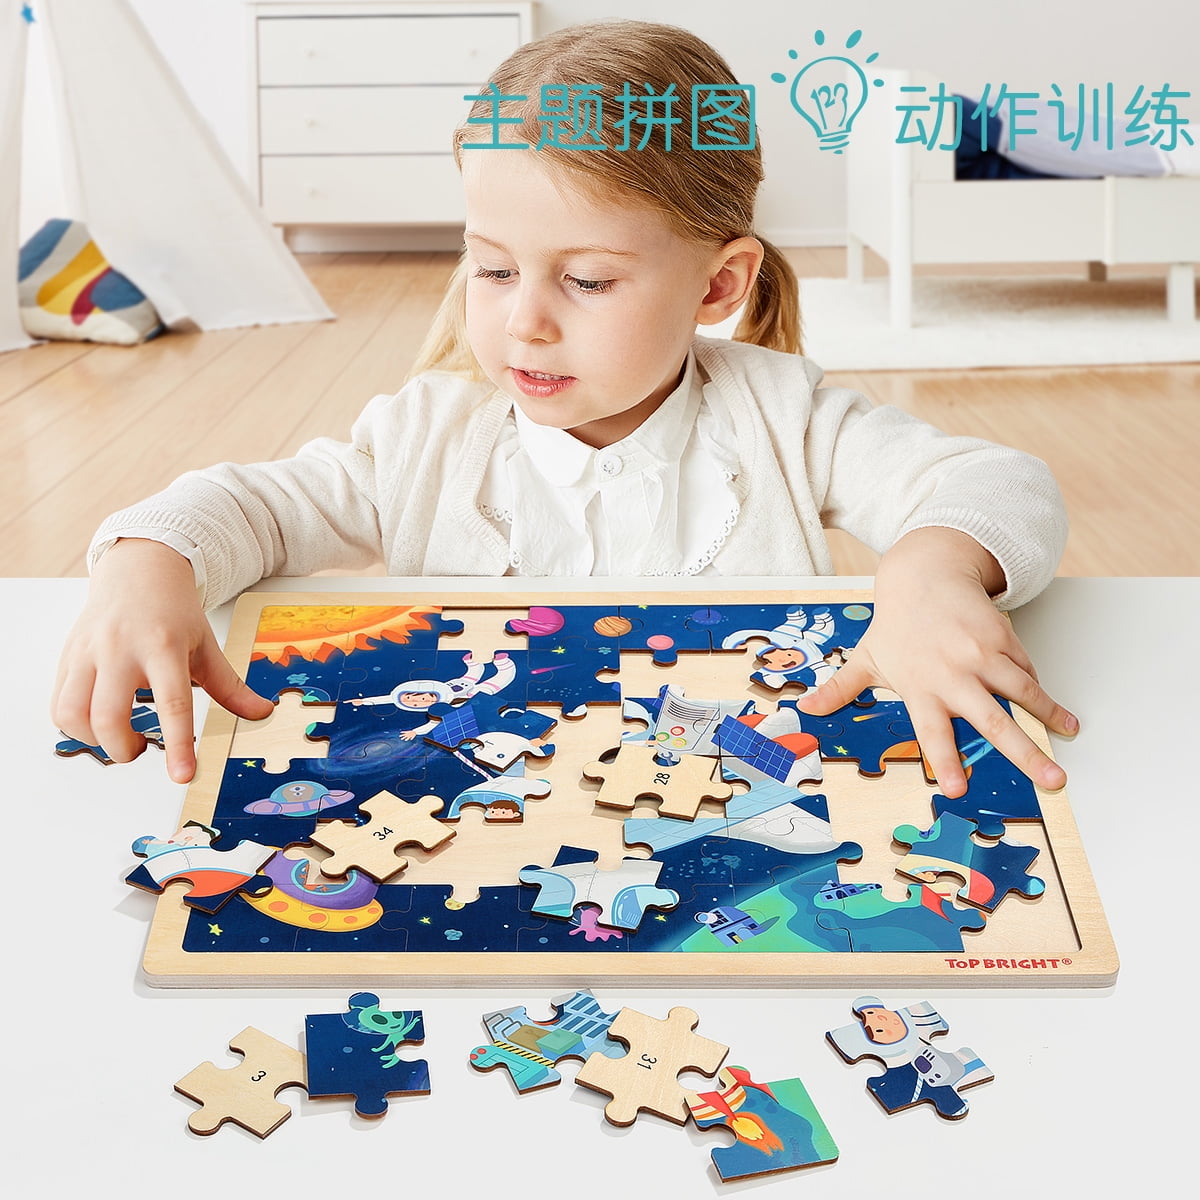 Details about   TOP BRIGHT 48 Piece Puzzles for Kids Ages 4-8-Construction Wooden Jigsaw Puzzle 